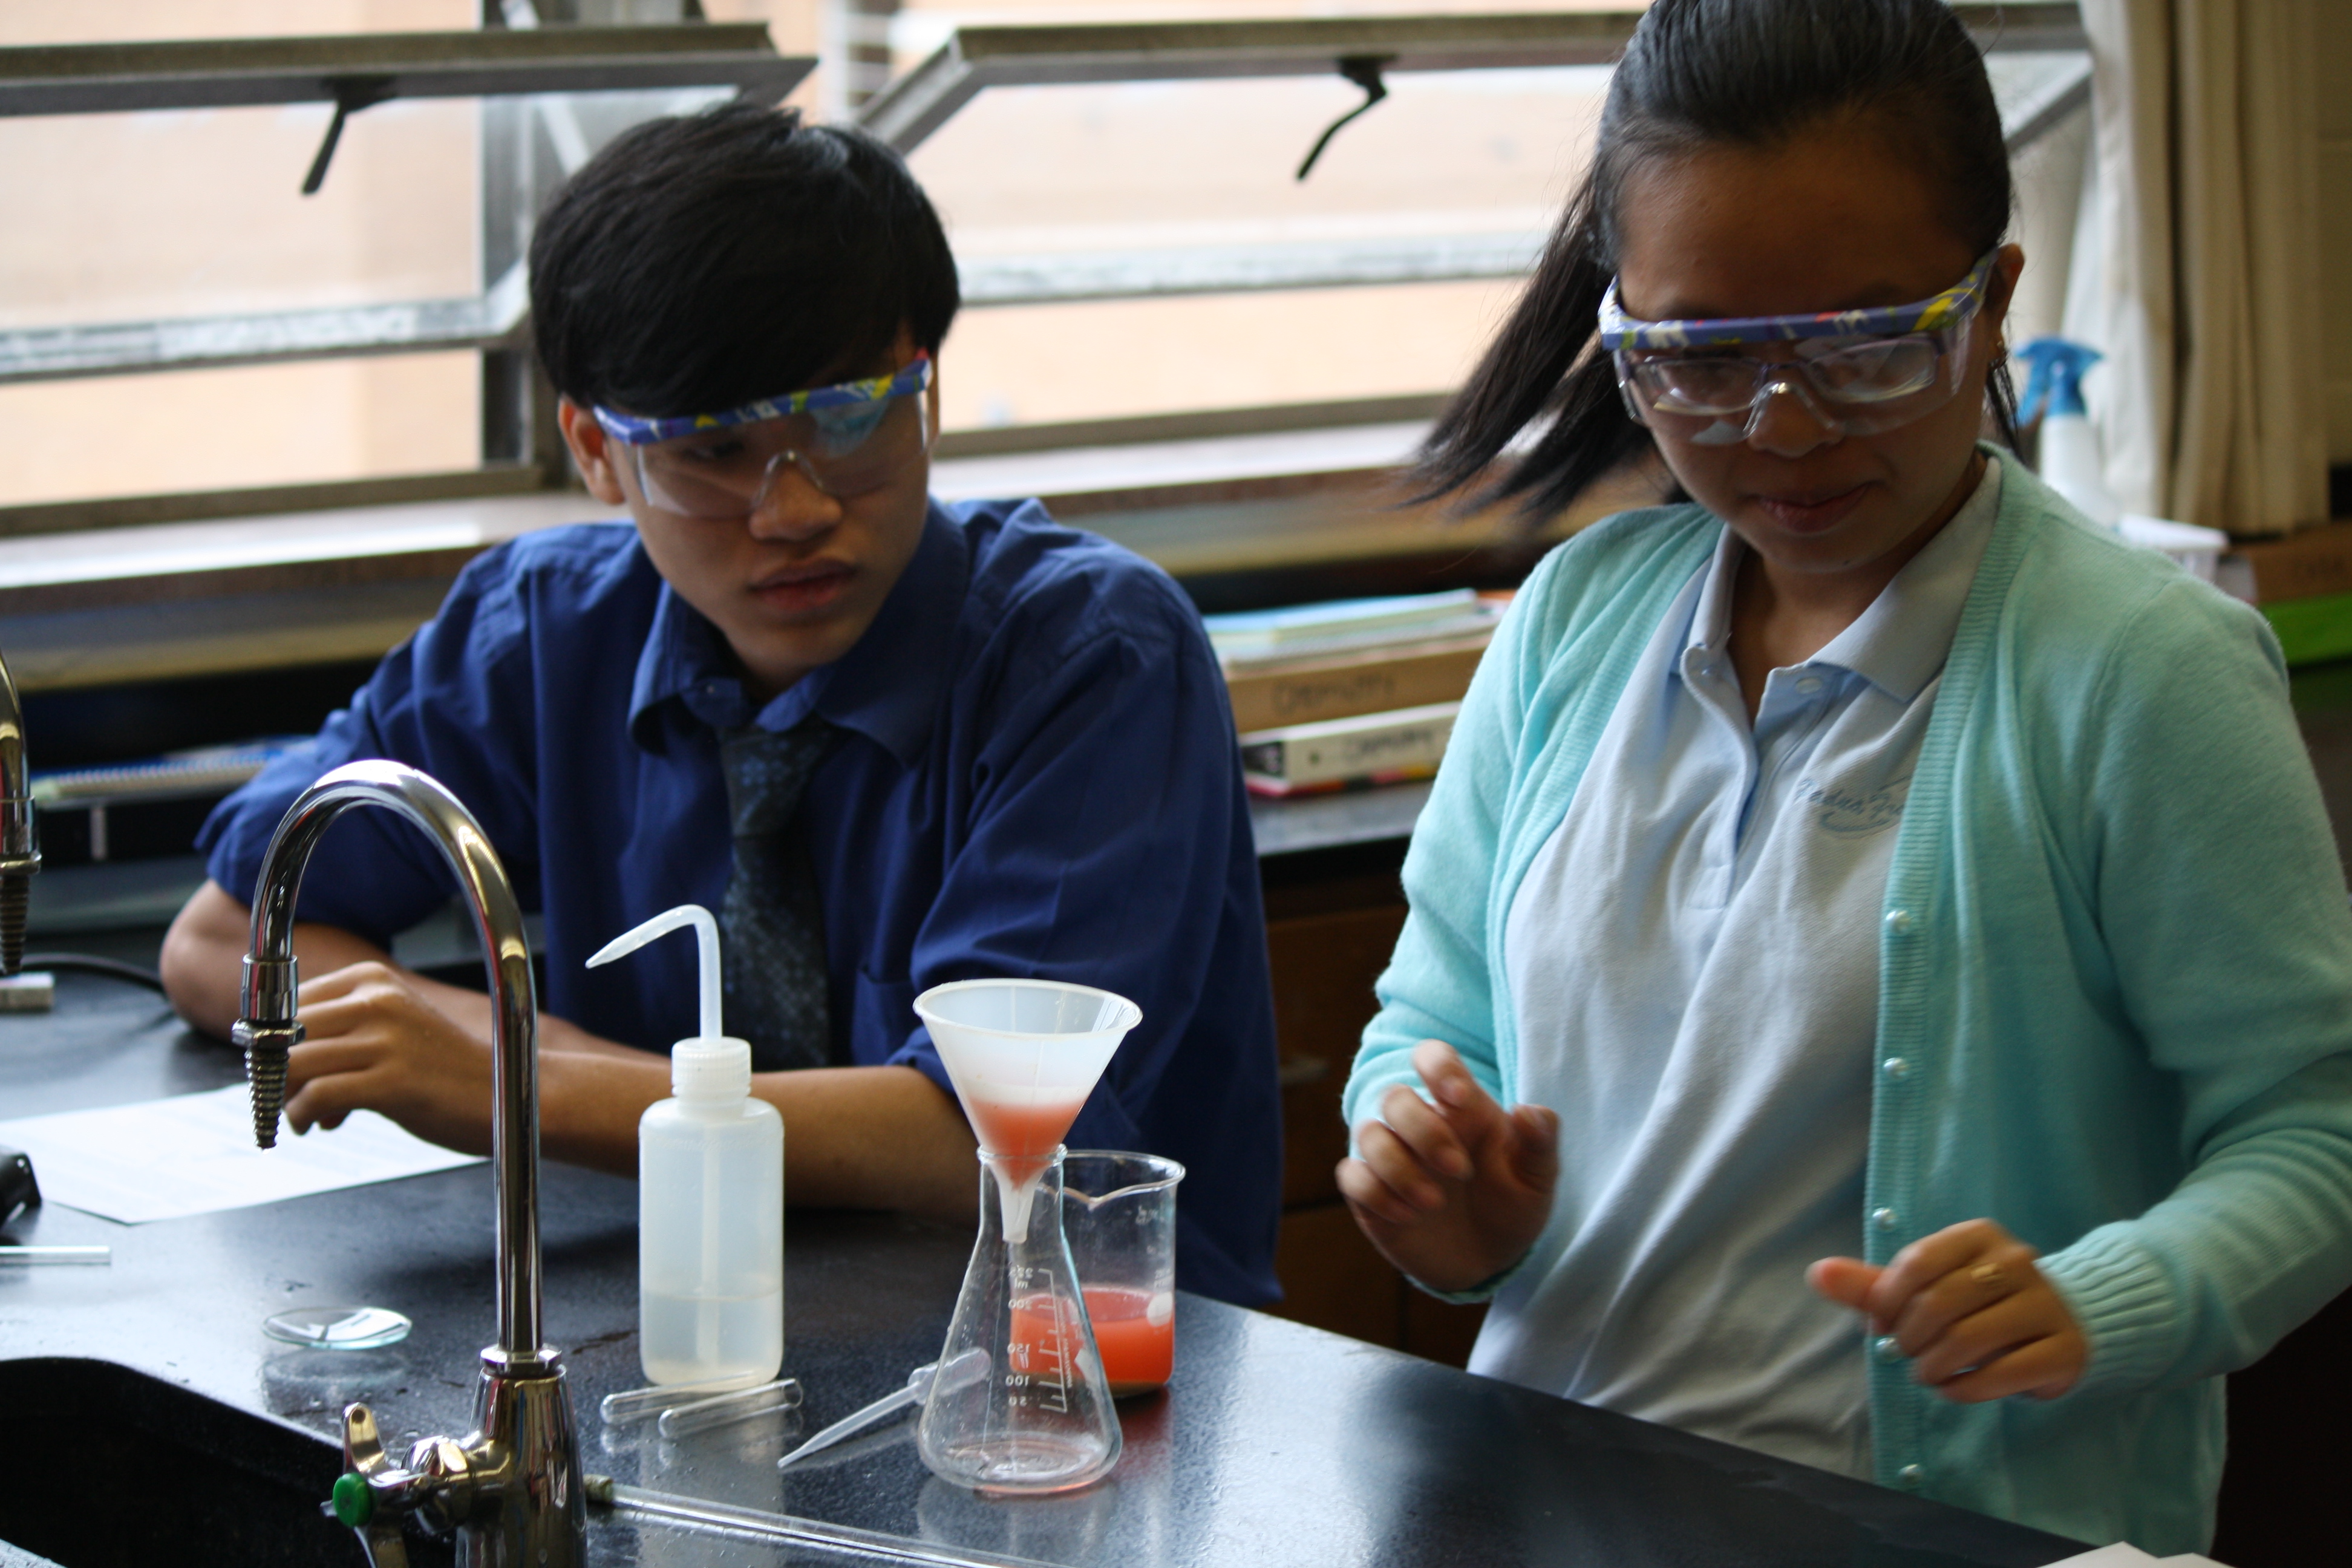 Padua Students in Science Laboratory at Padua Franciscan High School in Parma, OH